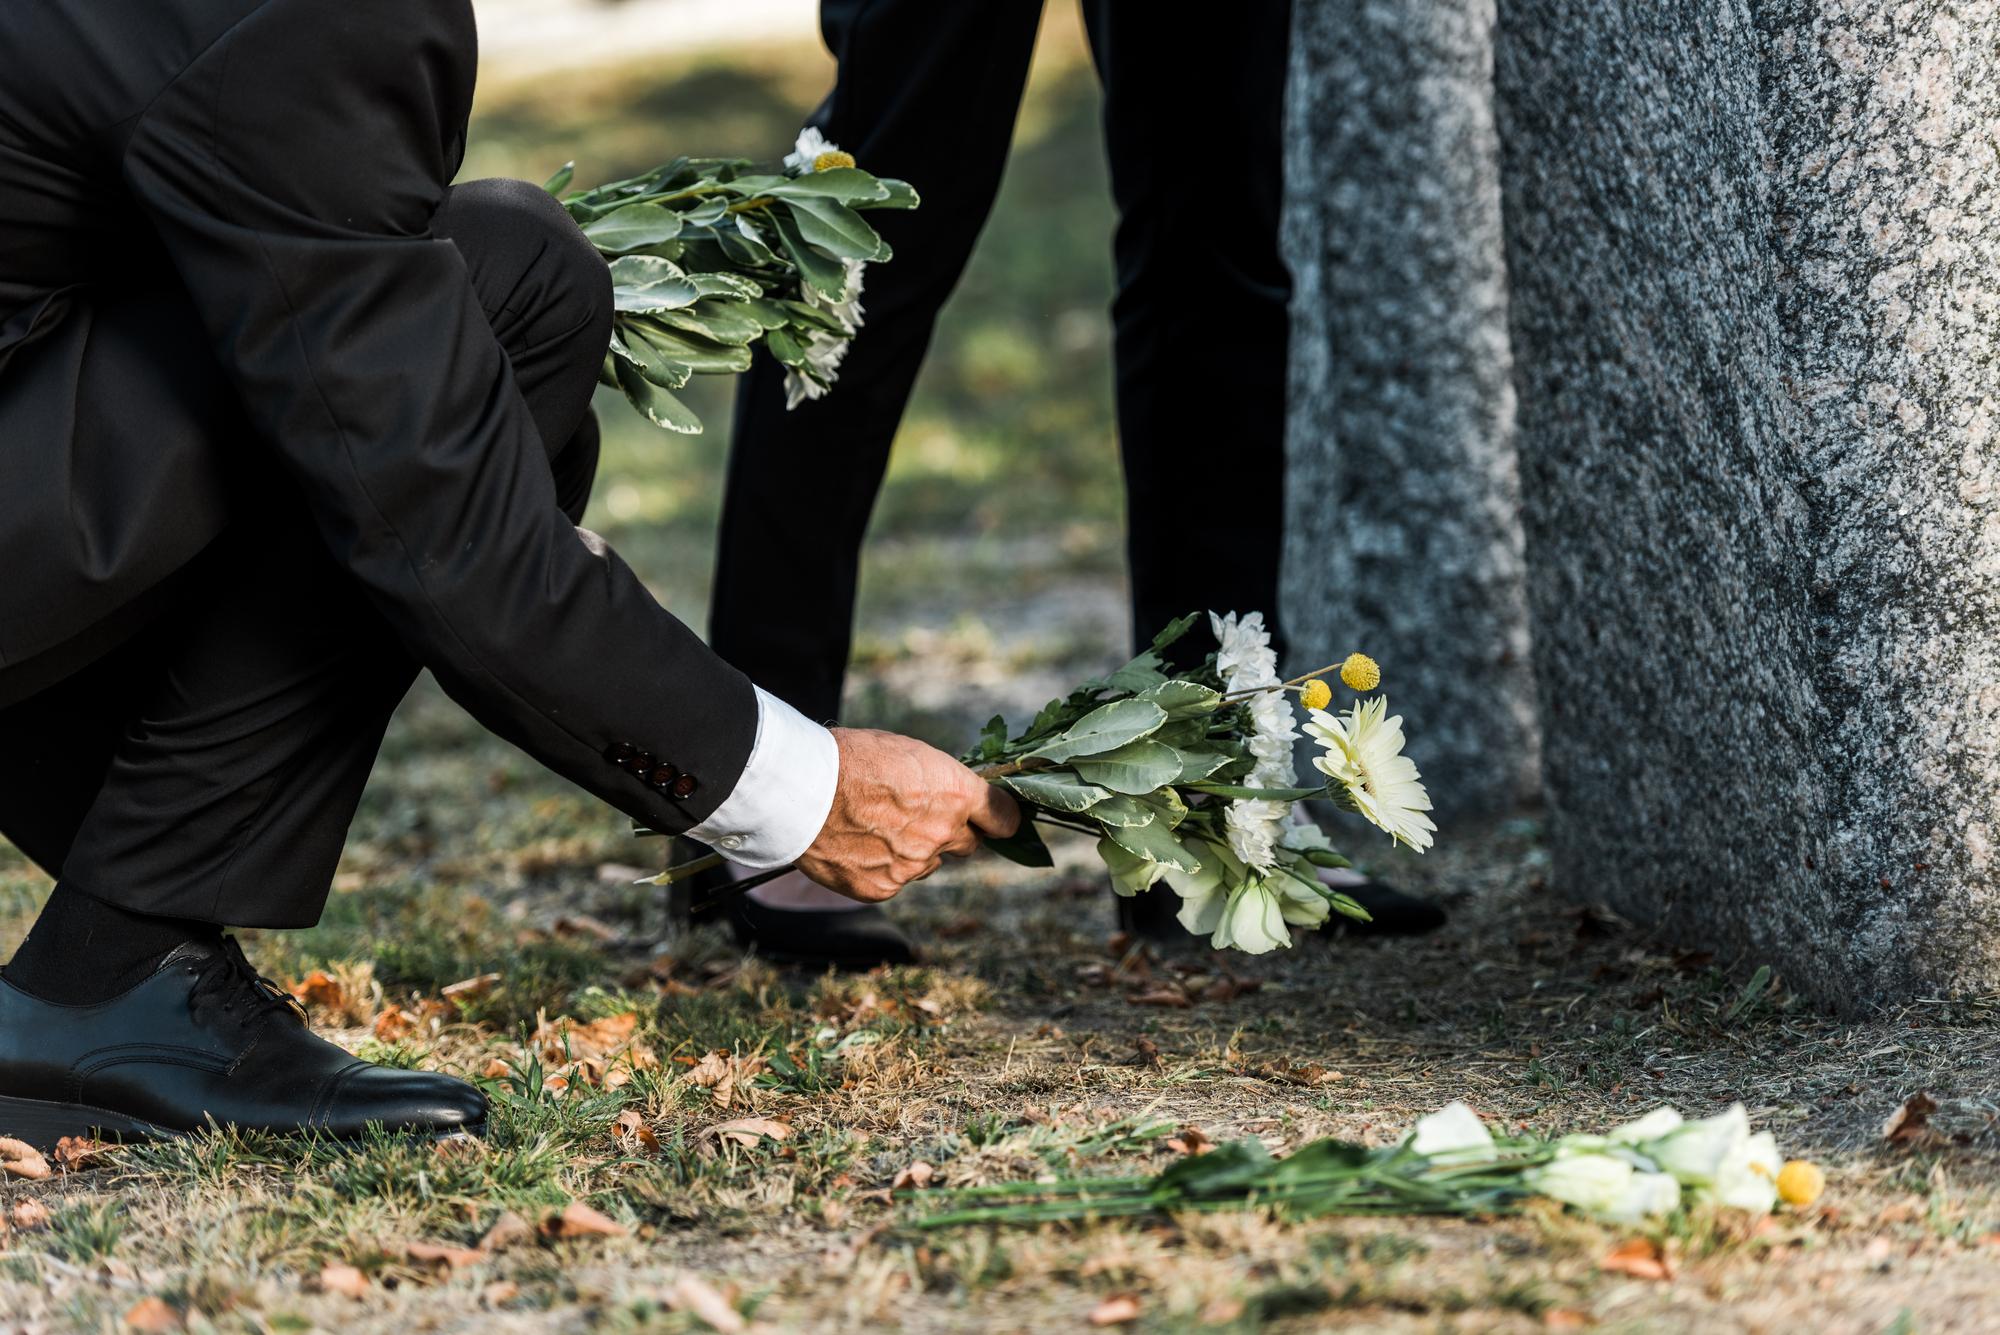 Man laying flowers on a grave - Tampa wrongful death lawyer